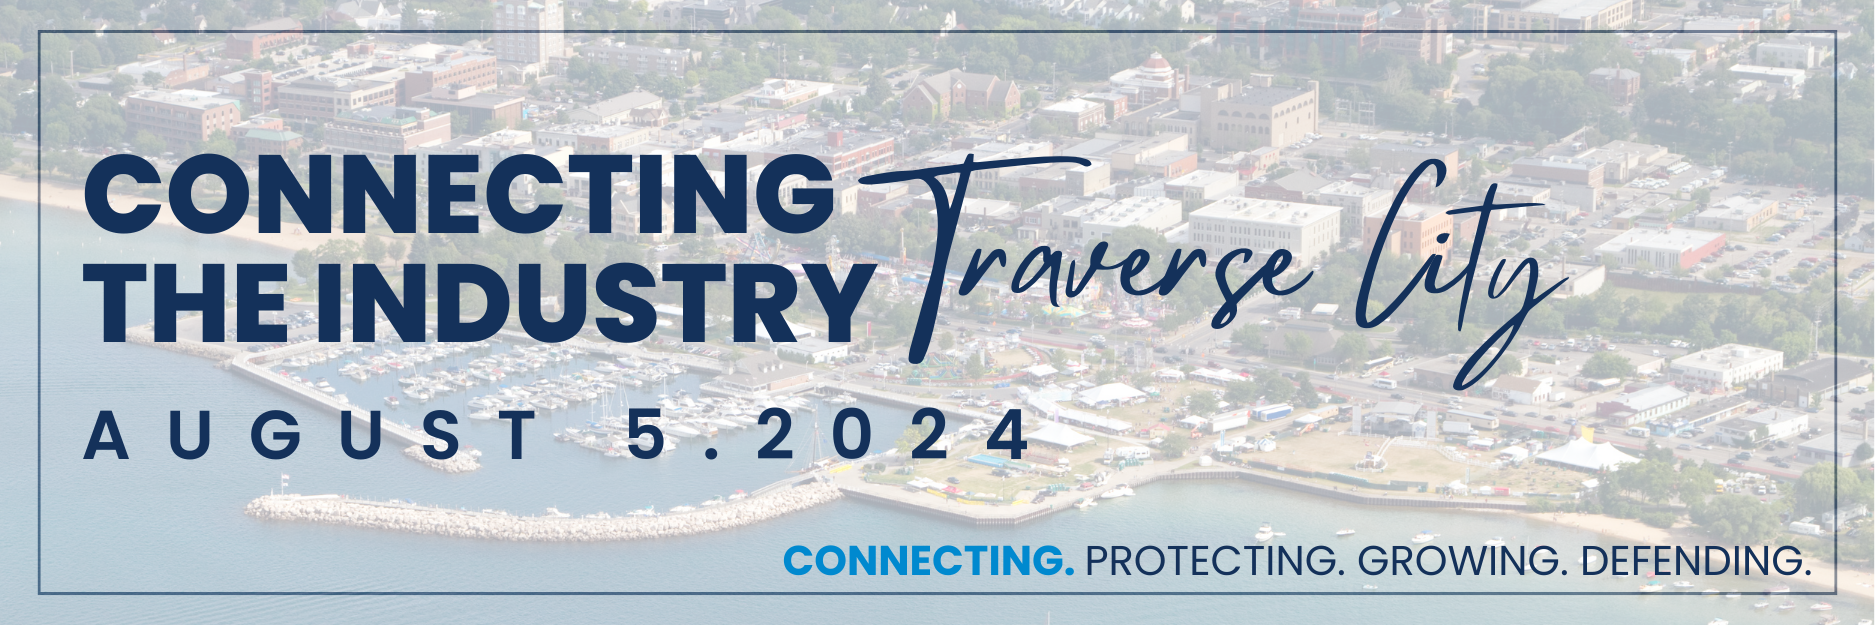 Connecting the Industry: Traverse City